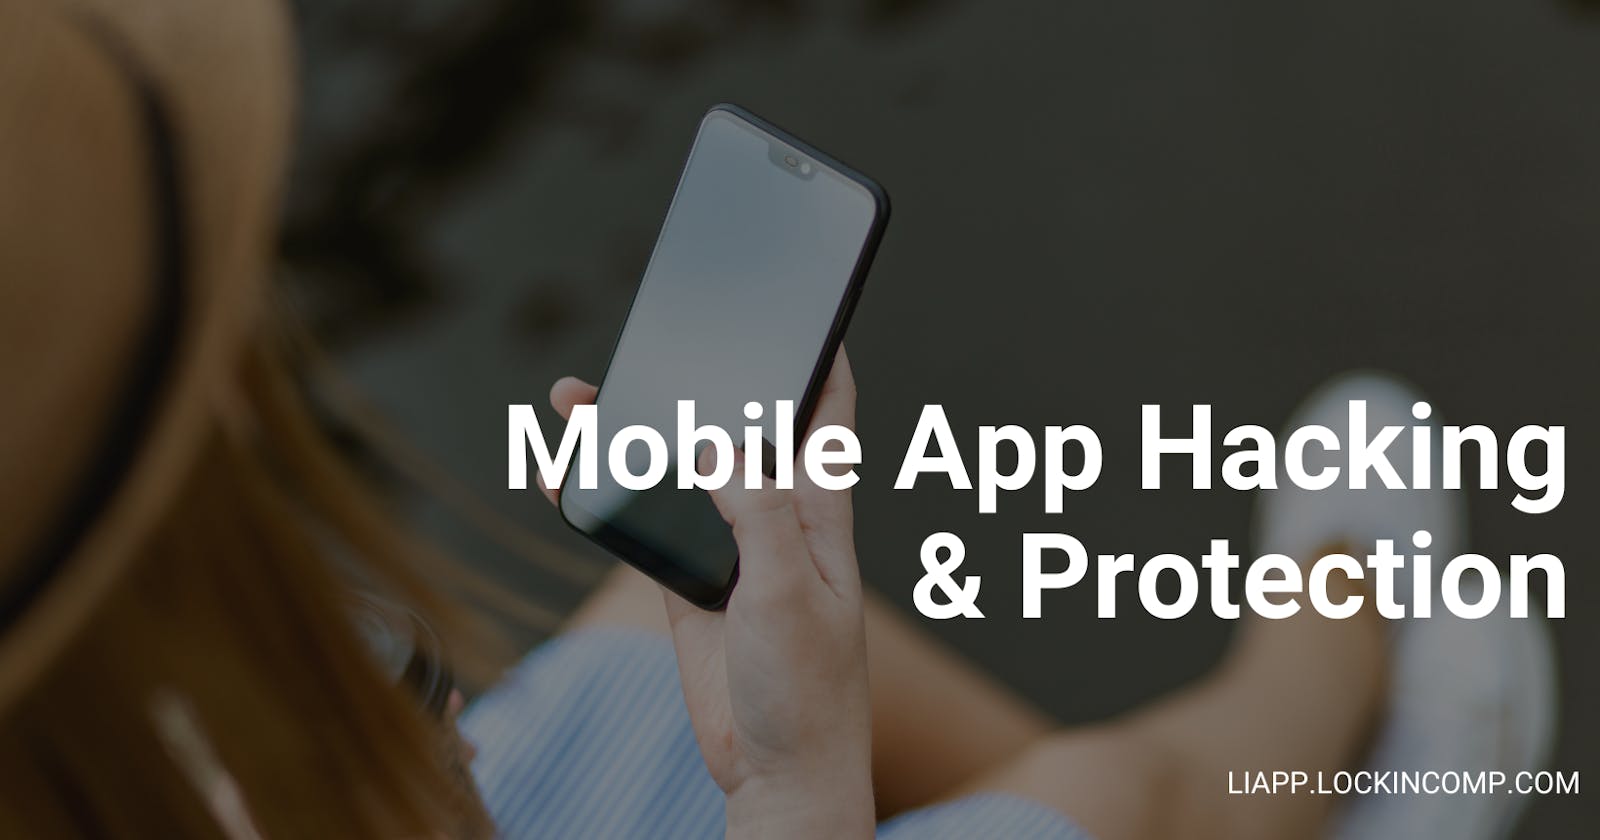 Mobile App Hacking & Protection